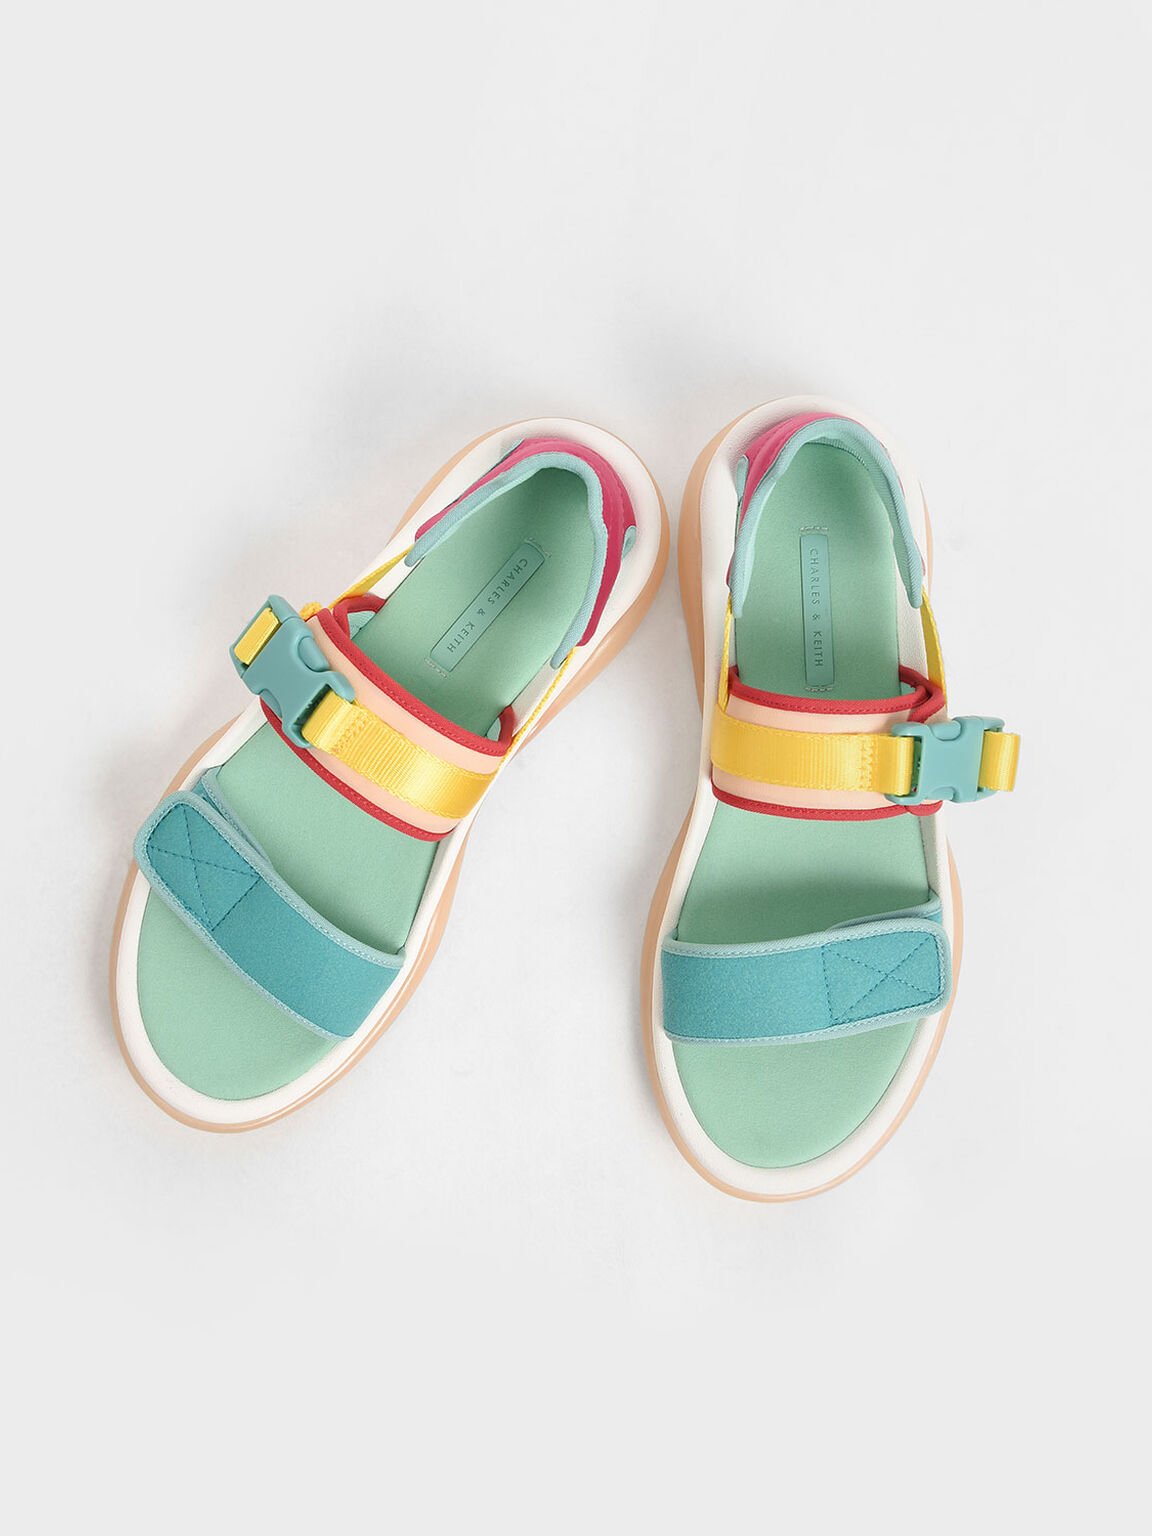 Strappy Chunky Sandals, Teal, hi-res